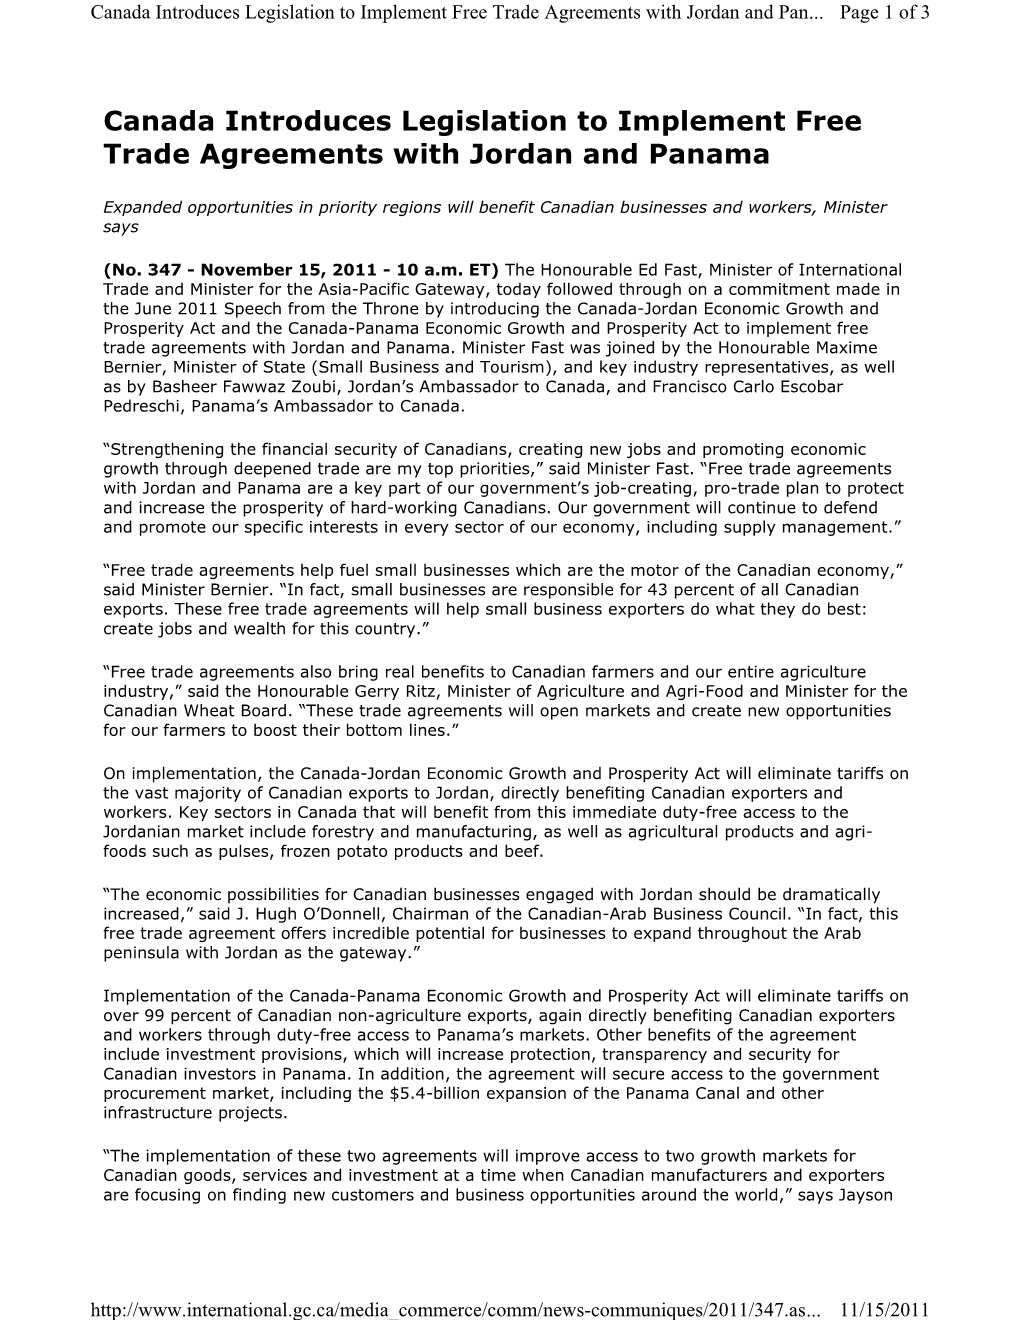 Canada Introduces Legislation to Implement Free Trade Agreements with Jordan and Panama